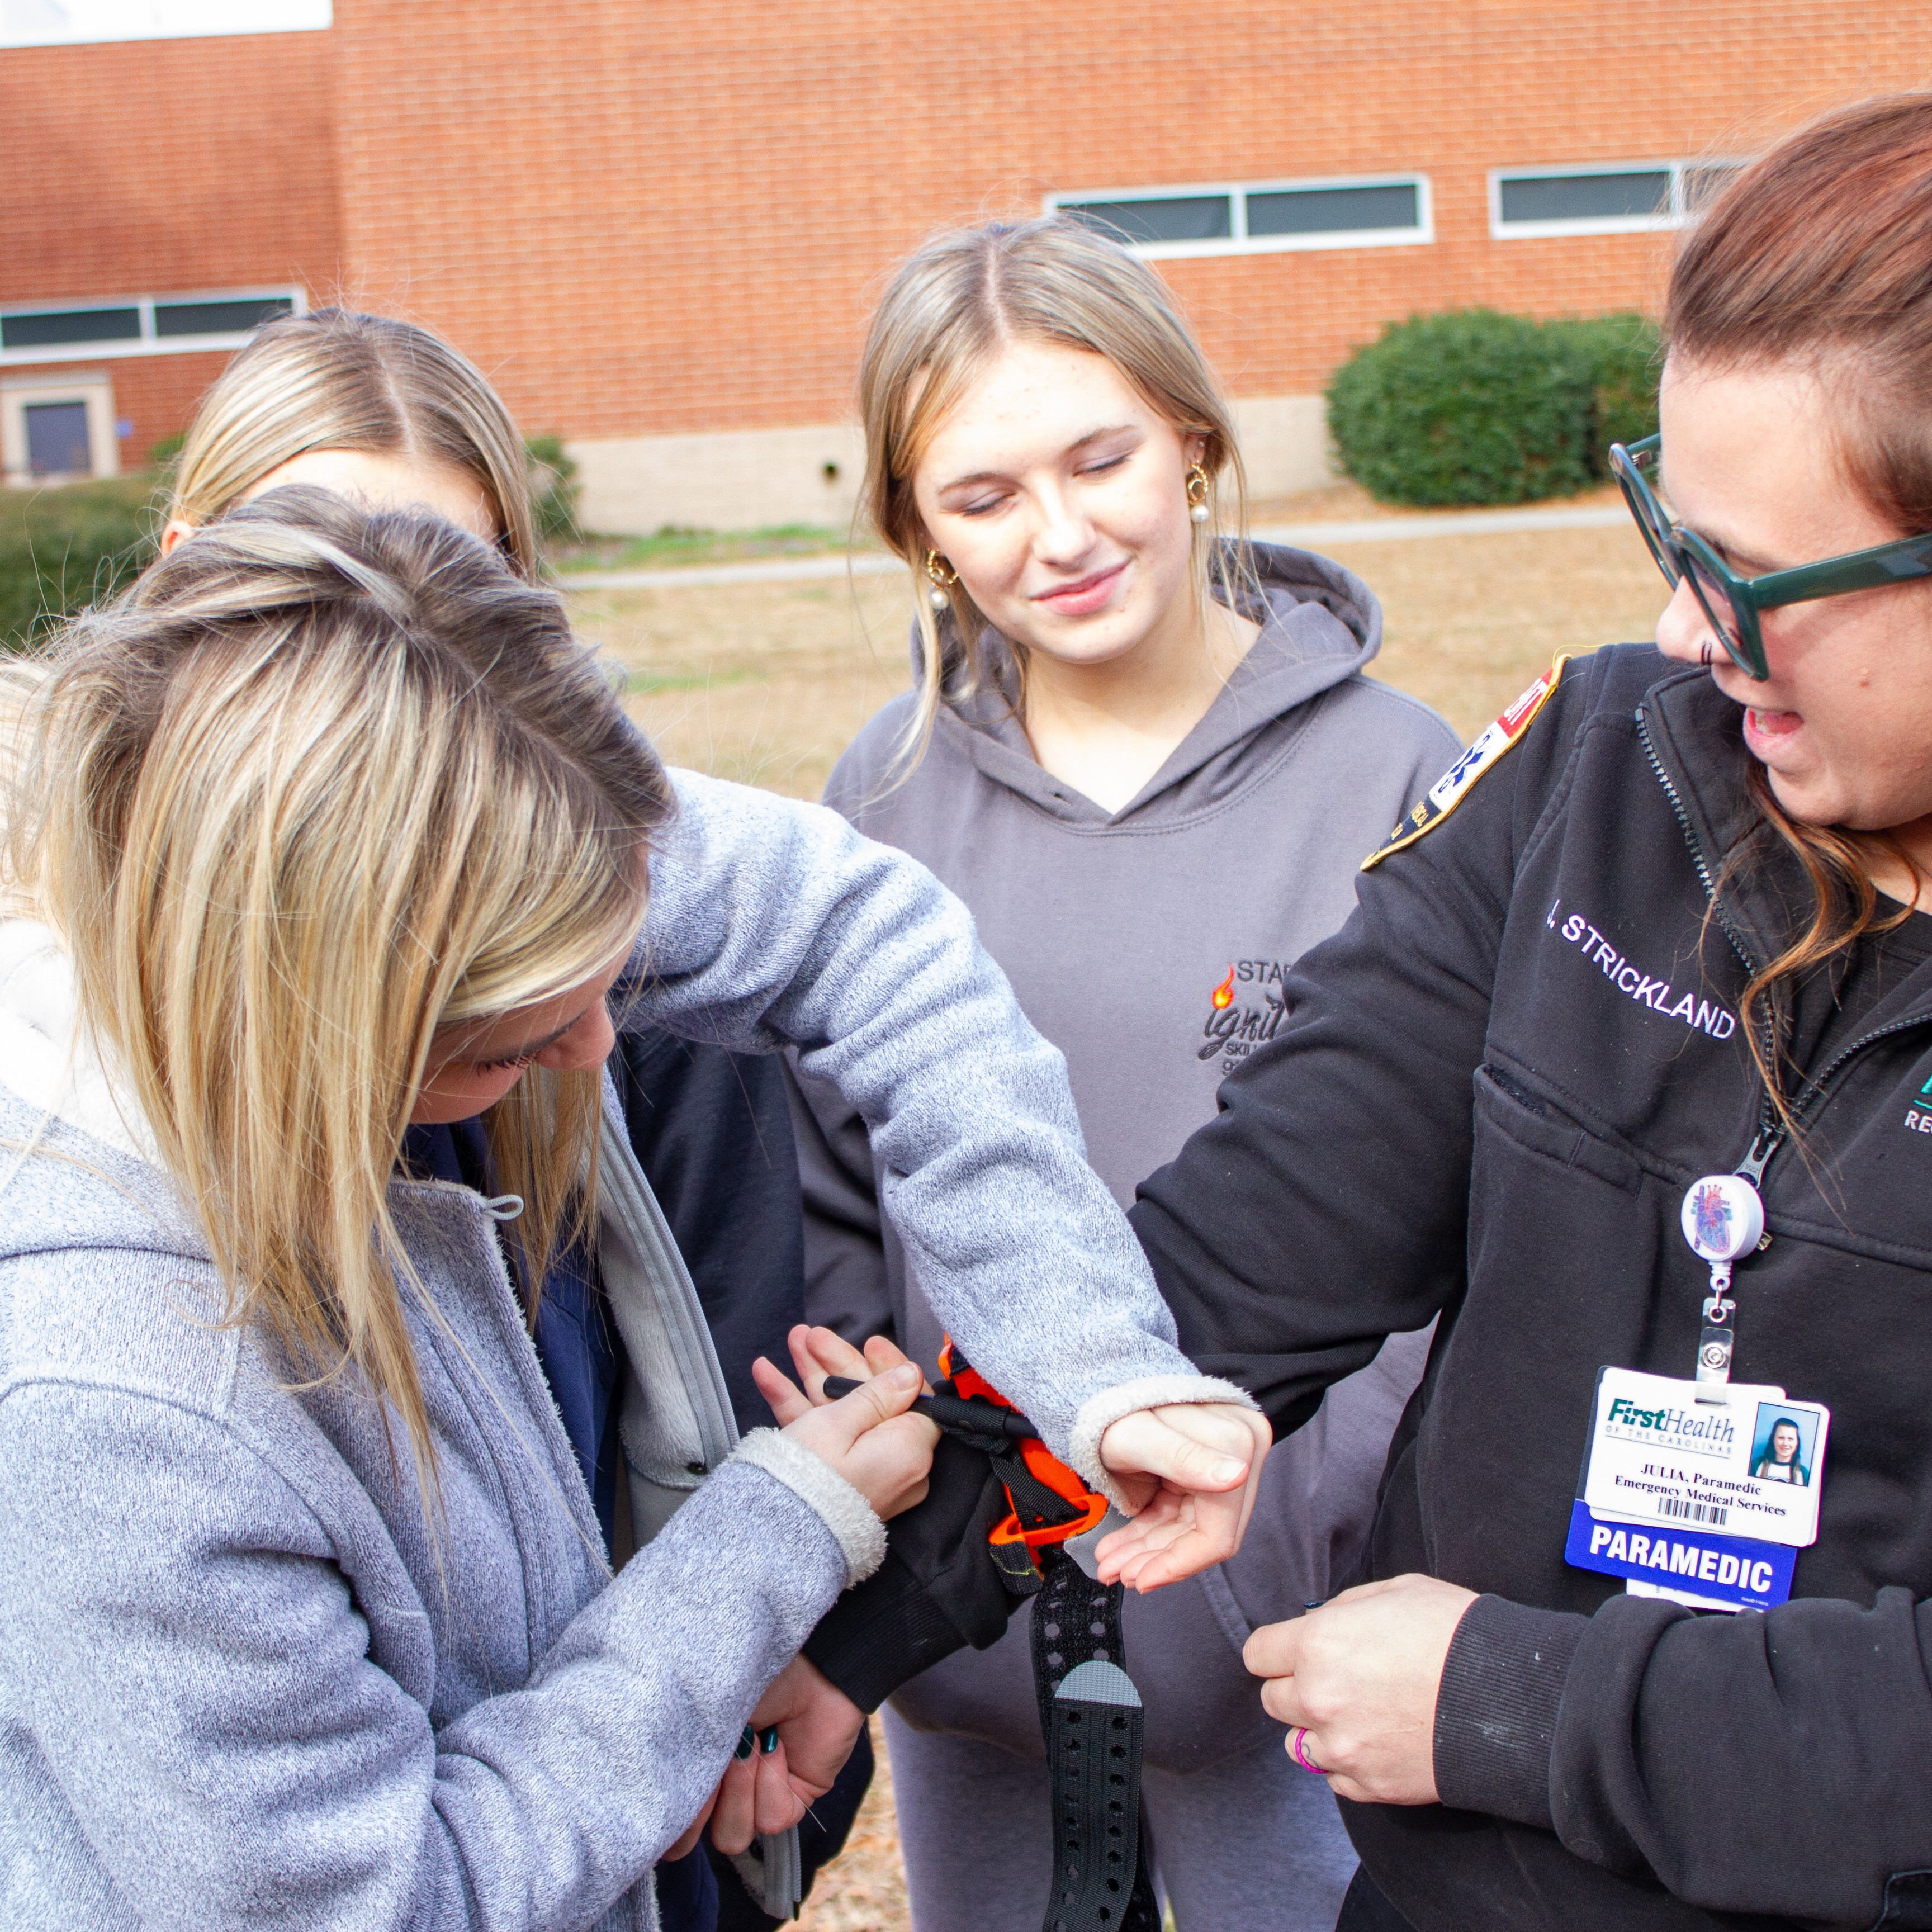 Academy of Health Sciences students at SLHS get hands on experience with tourniquets while FirstHealth Paramedics visit their classes.